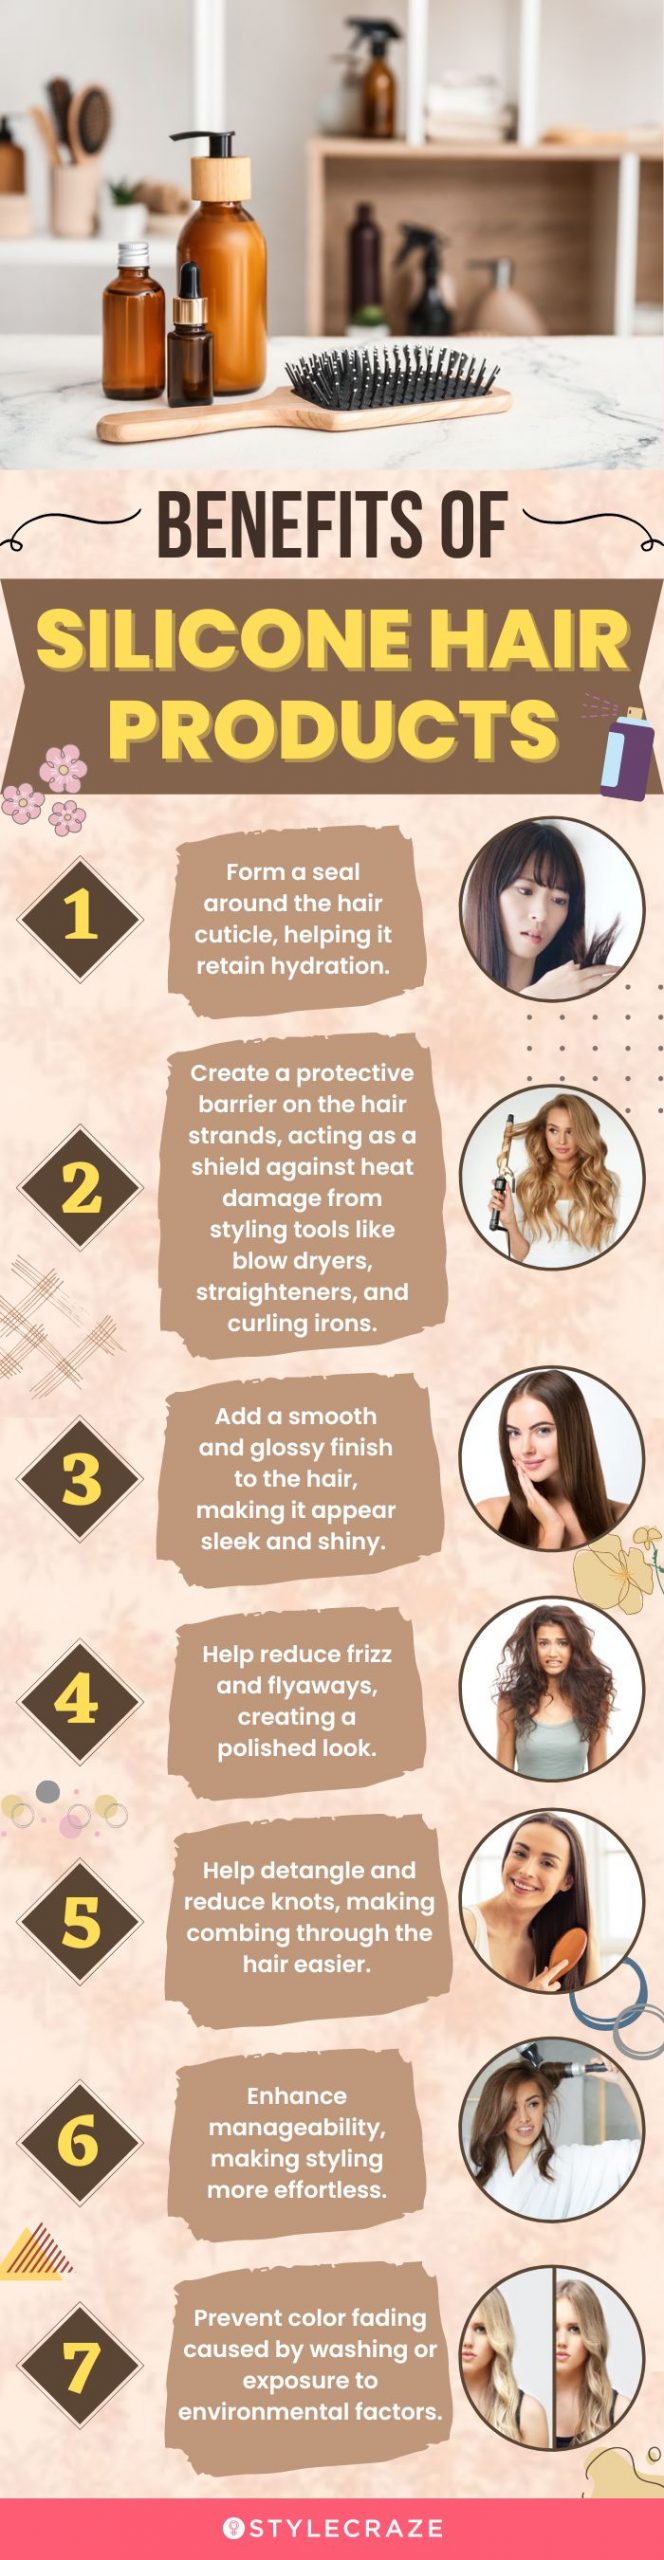 Benefits Of Silicone Hair Products (infographic)